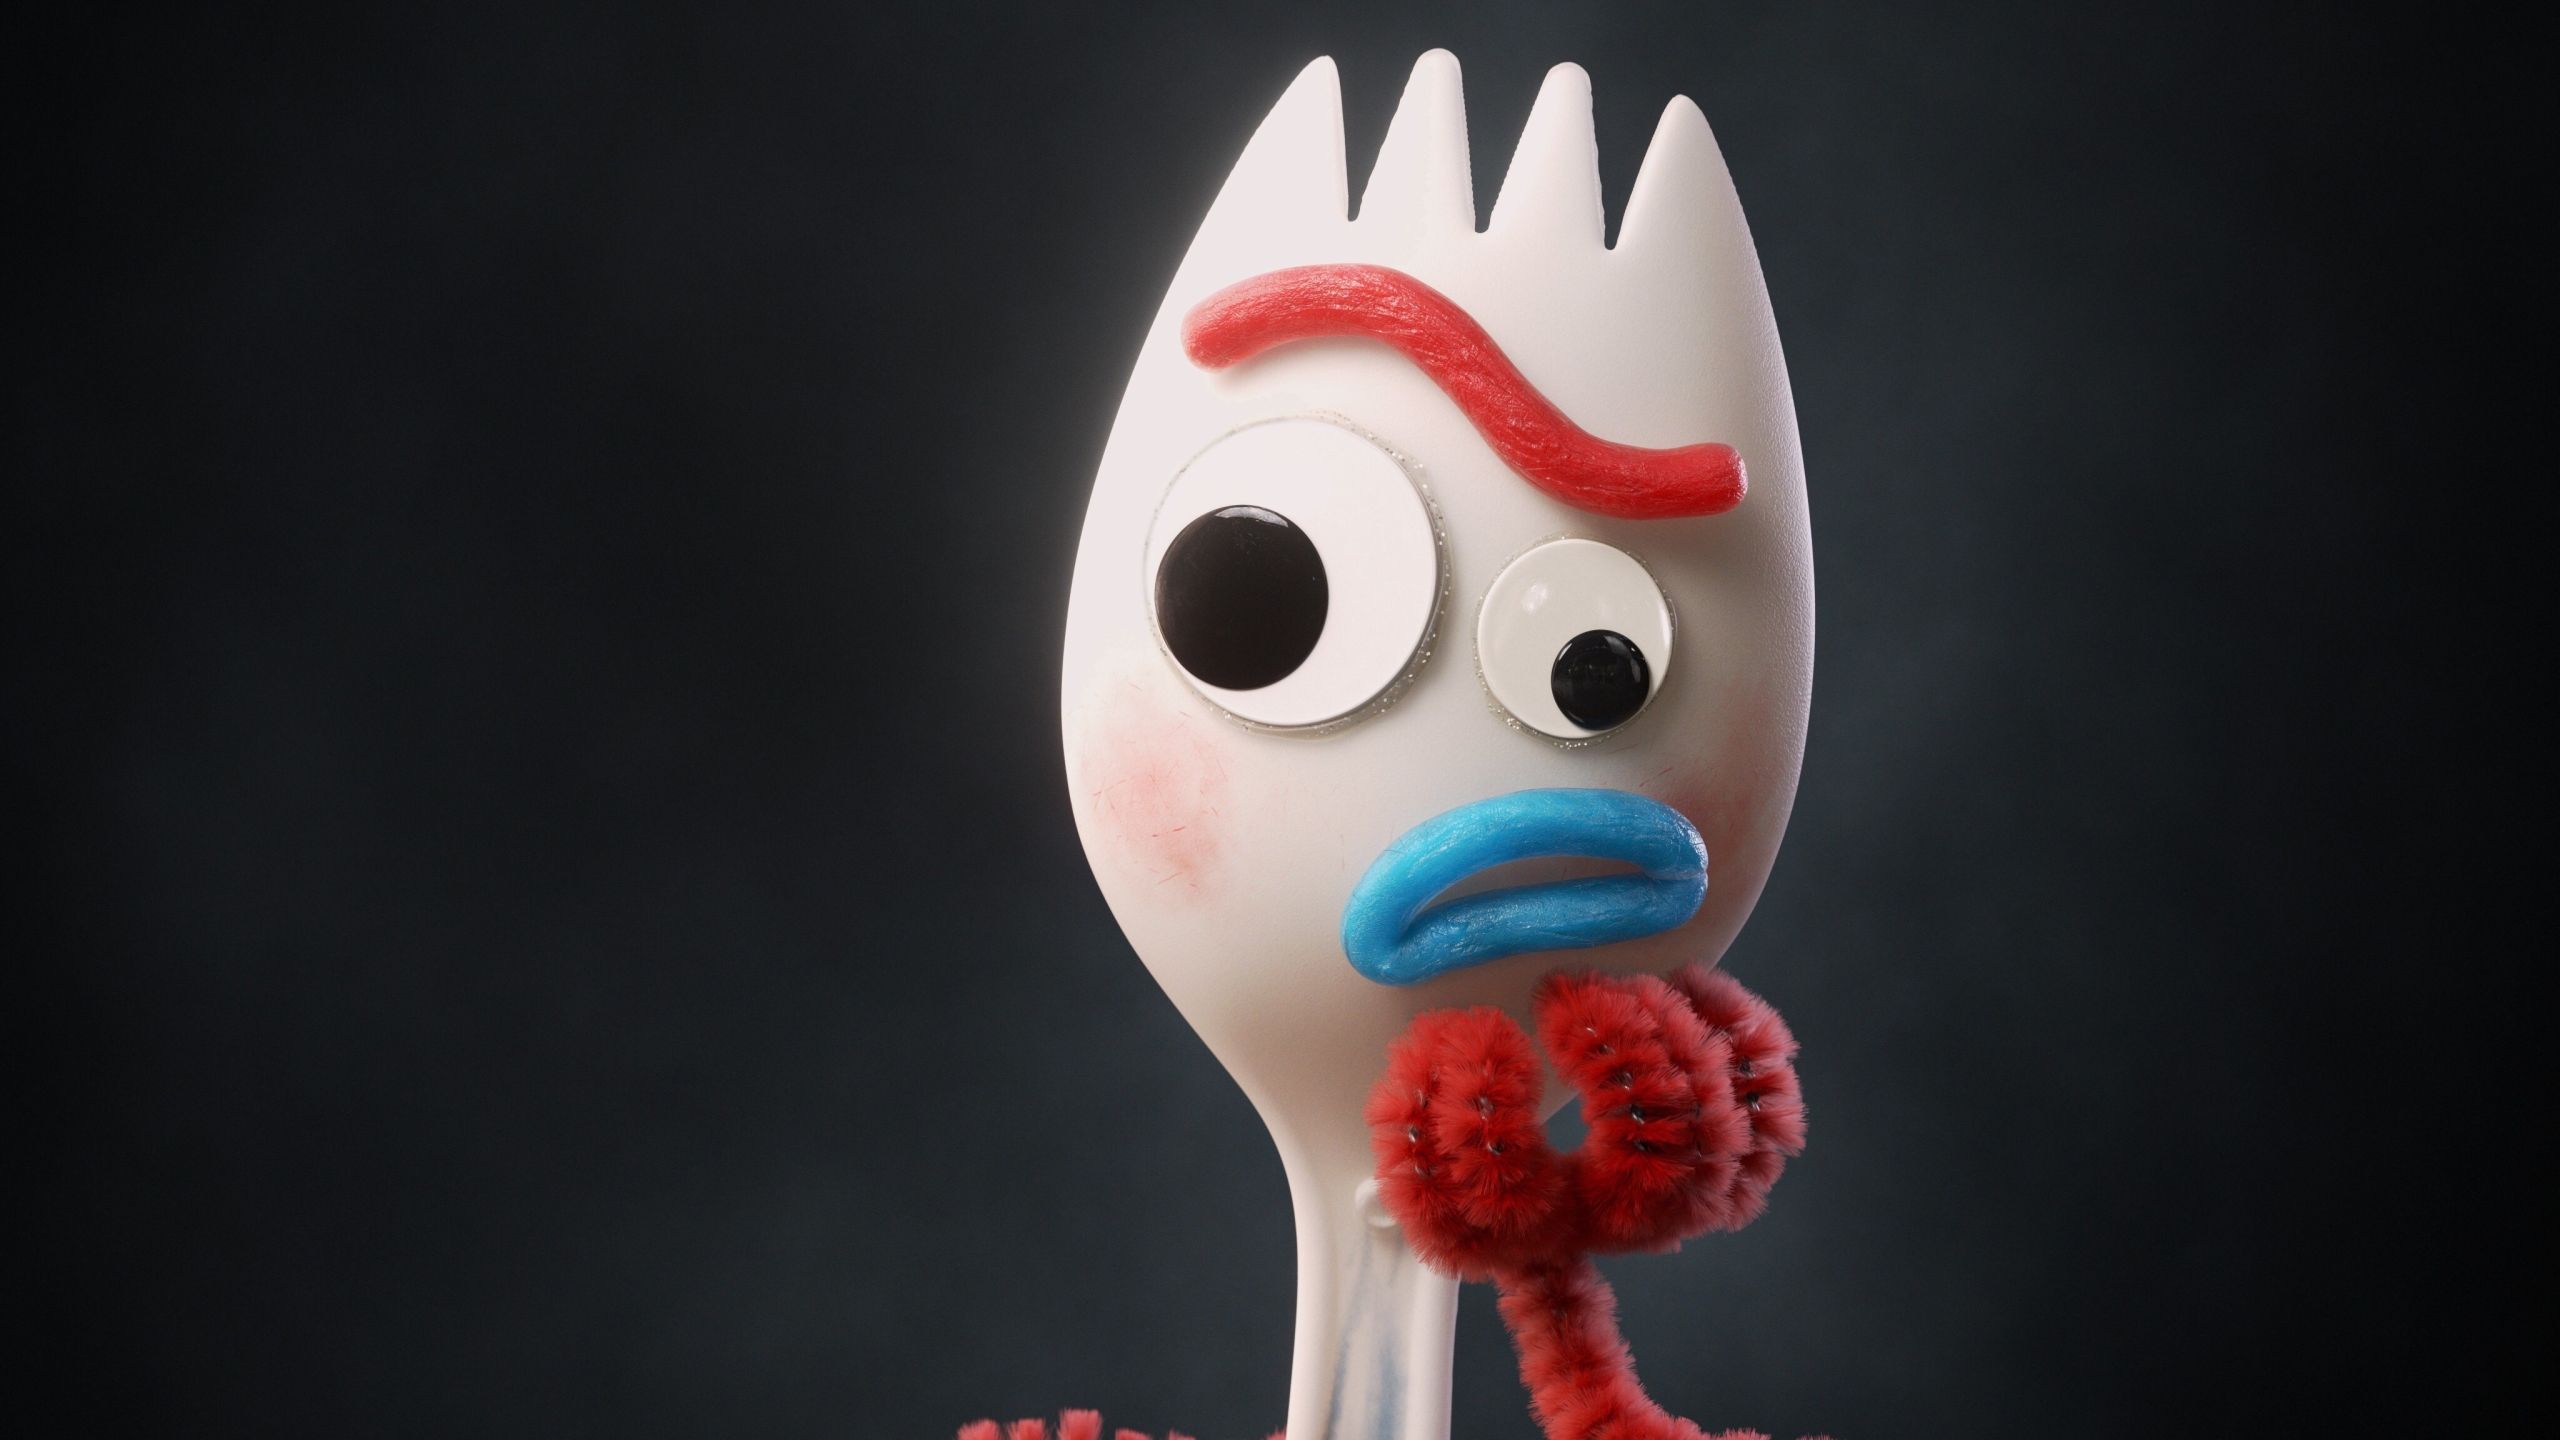 Forky In Toy Story 4 1440P Resolution Wallpaper, HD Movies 4K Wallpaper, Image, Photo and Background